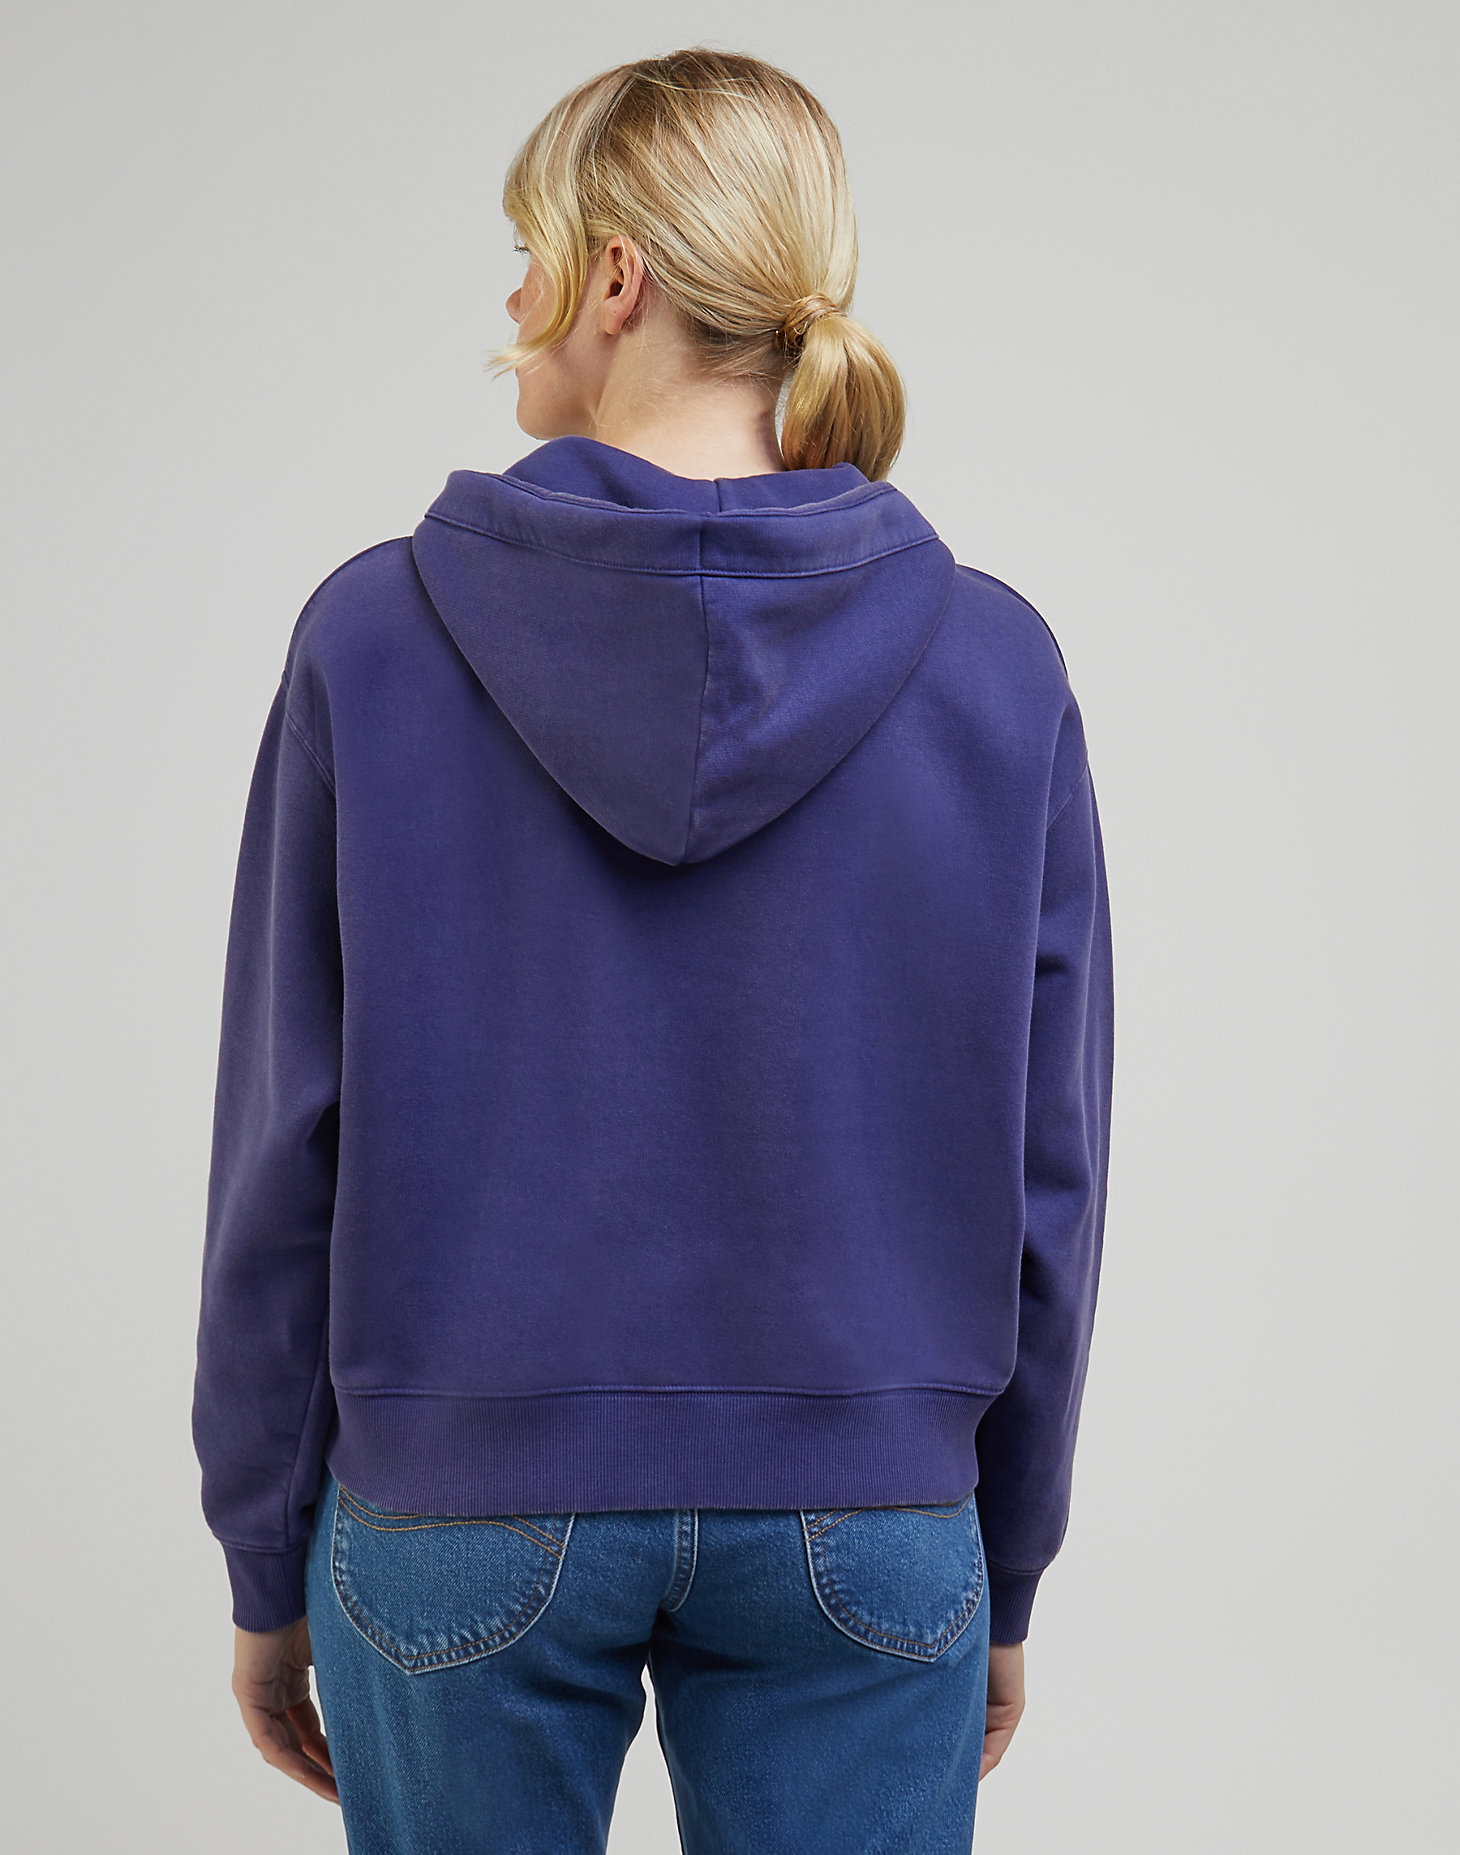 Relaxed Hoodie in Blueberry alternative view 1